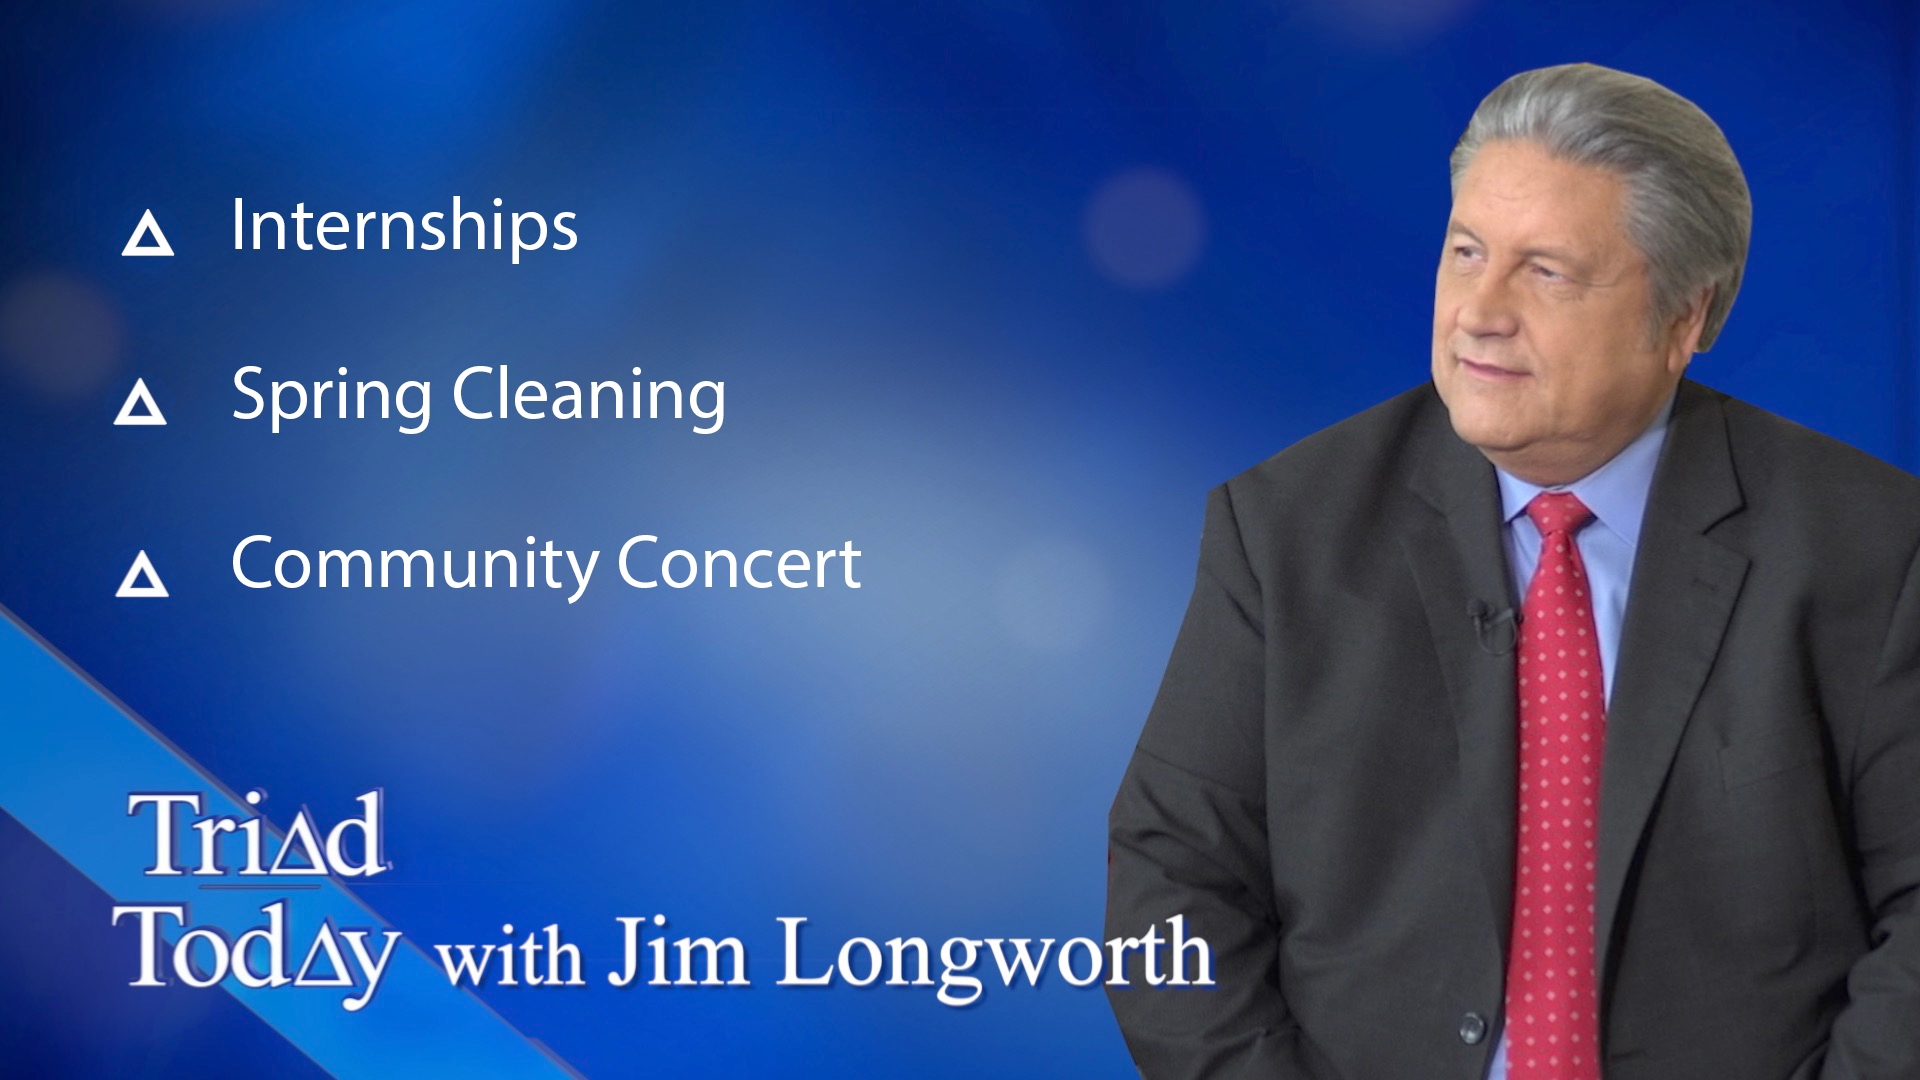 Jim Longworth and guests discuss internships, spring cleaning, and a community concert.